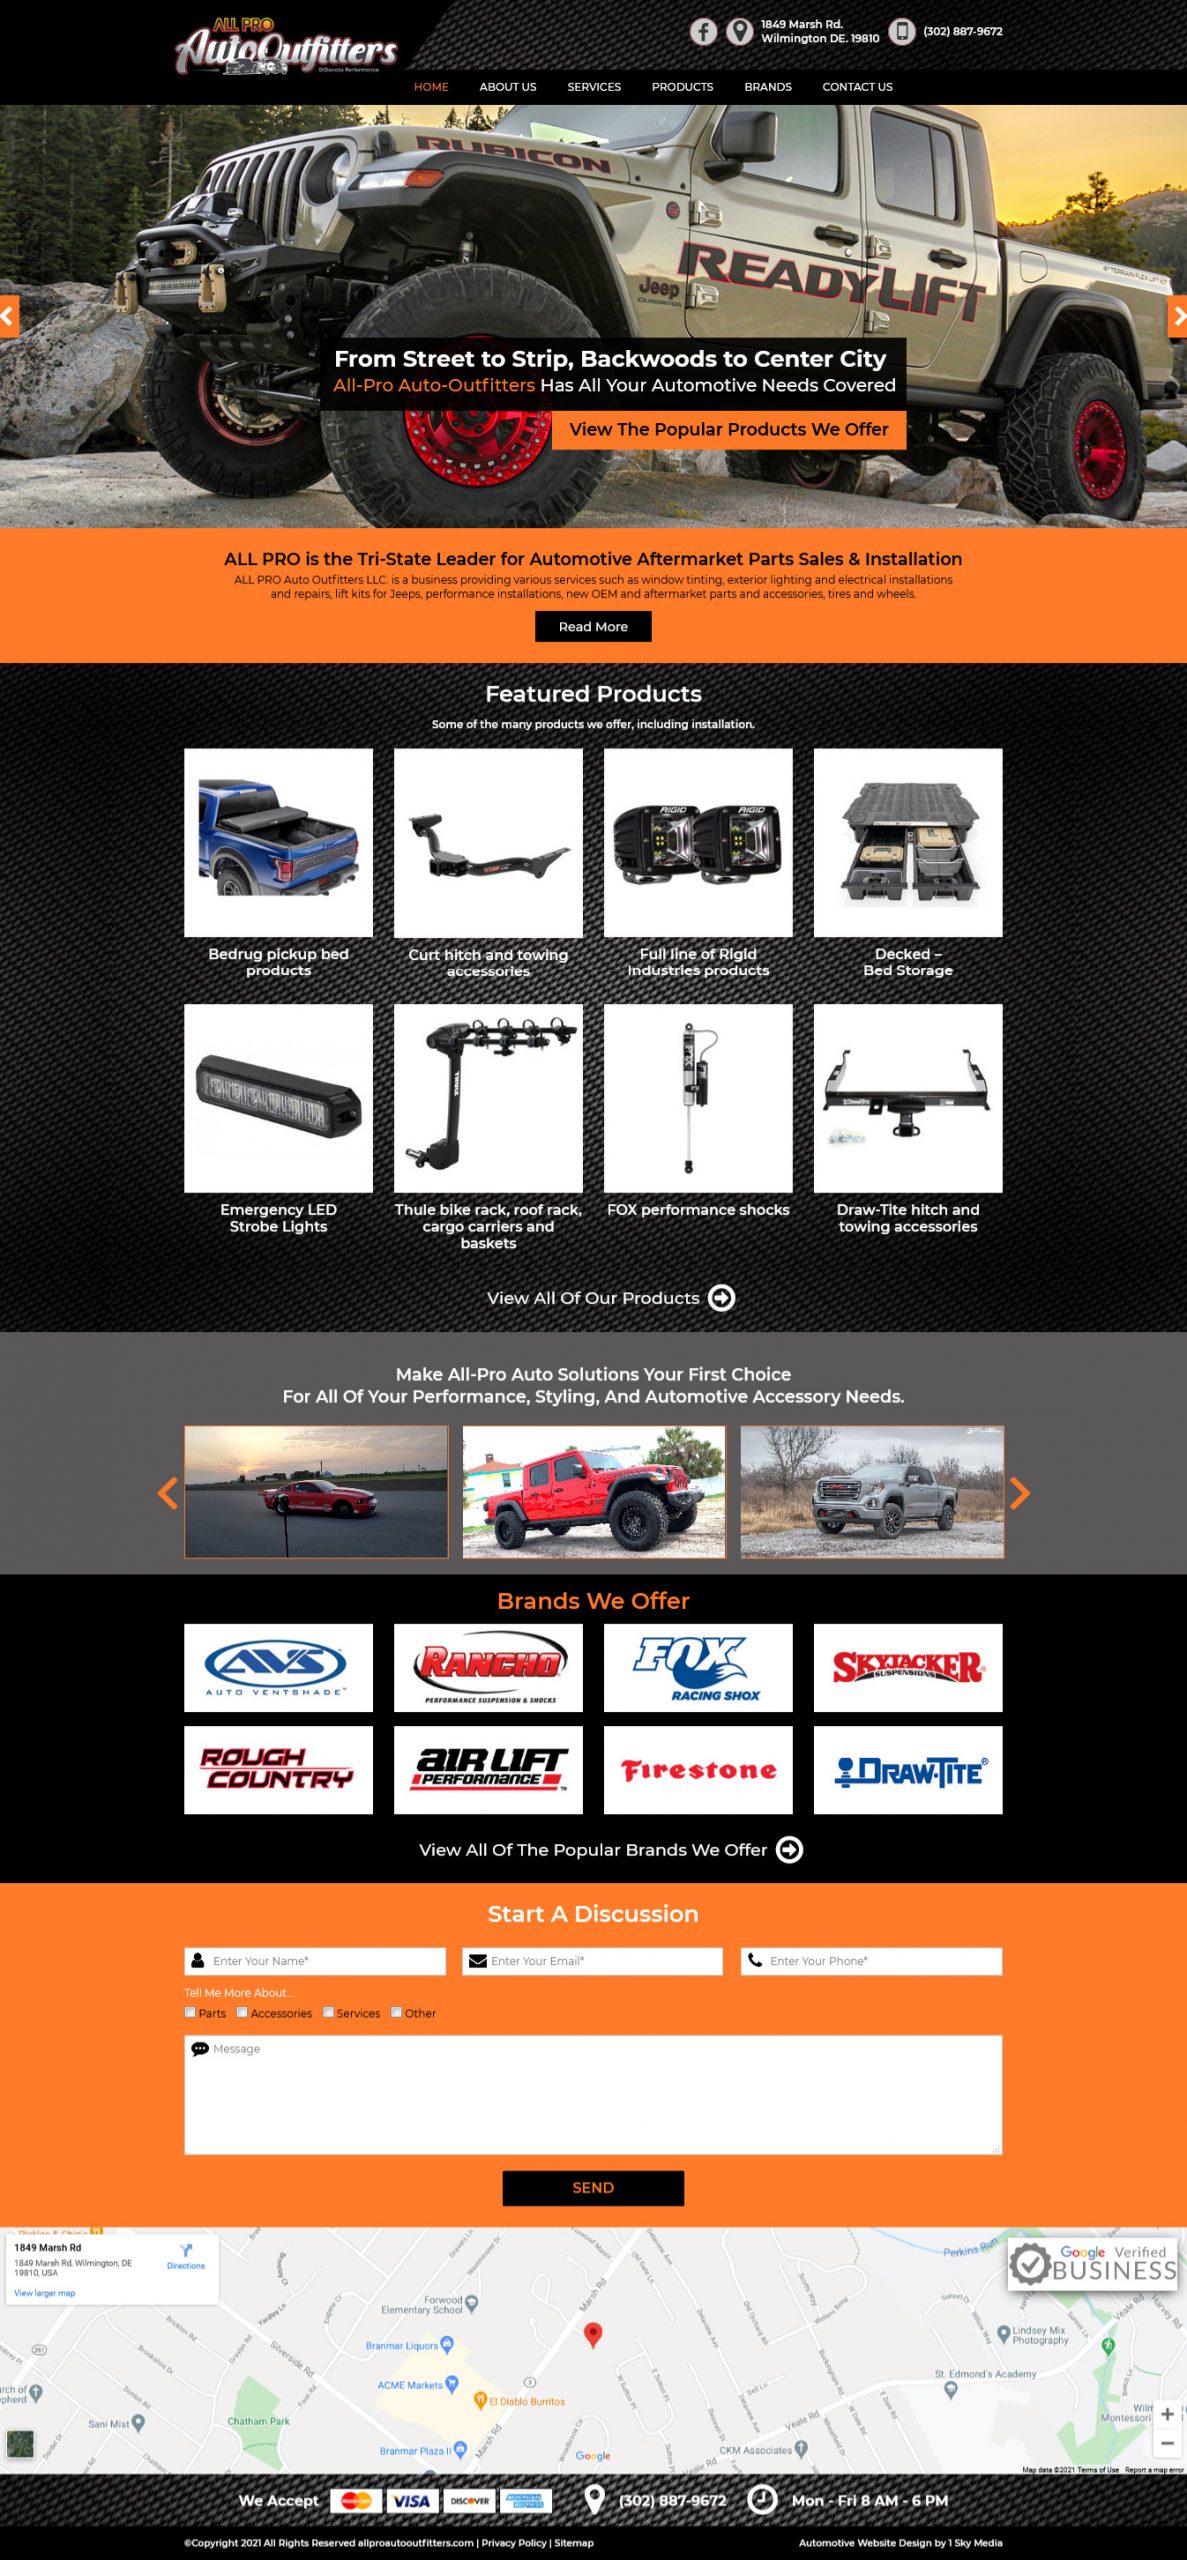 All Pro Auto Outfitters Website Design